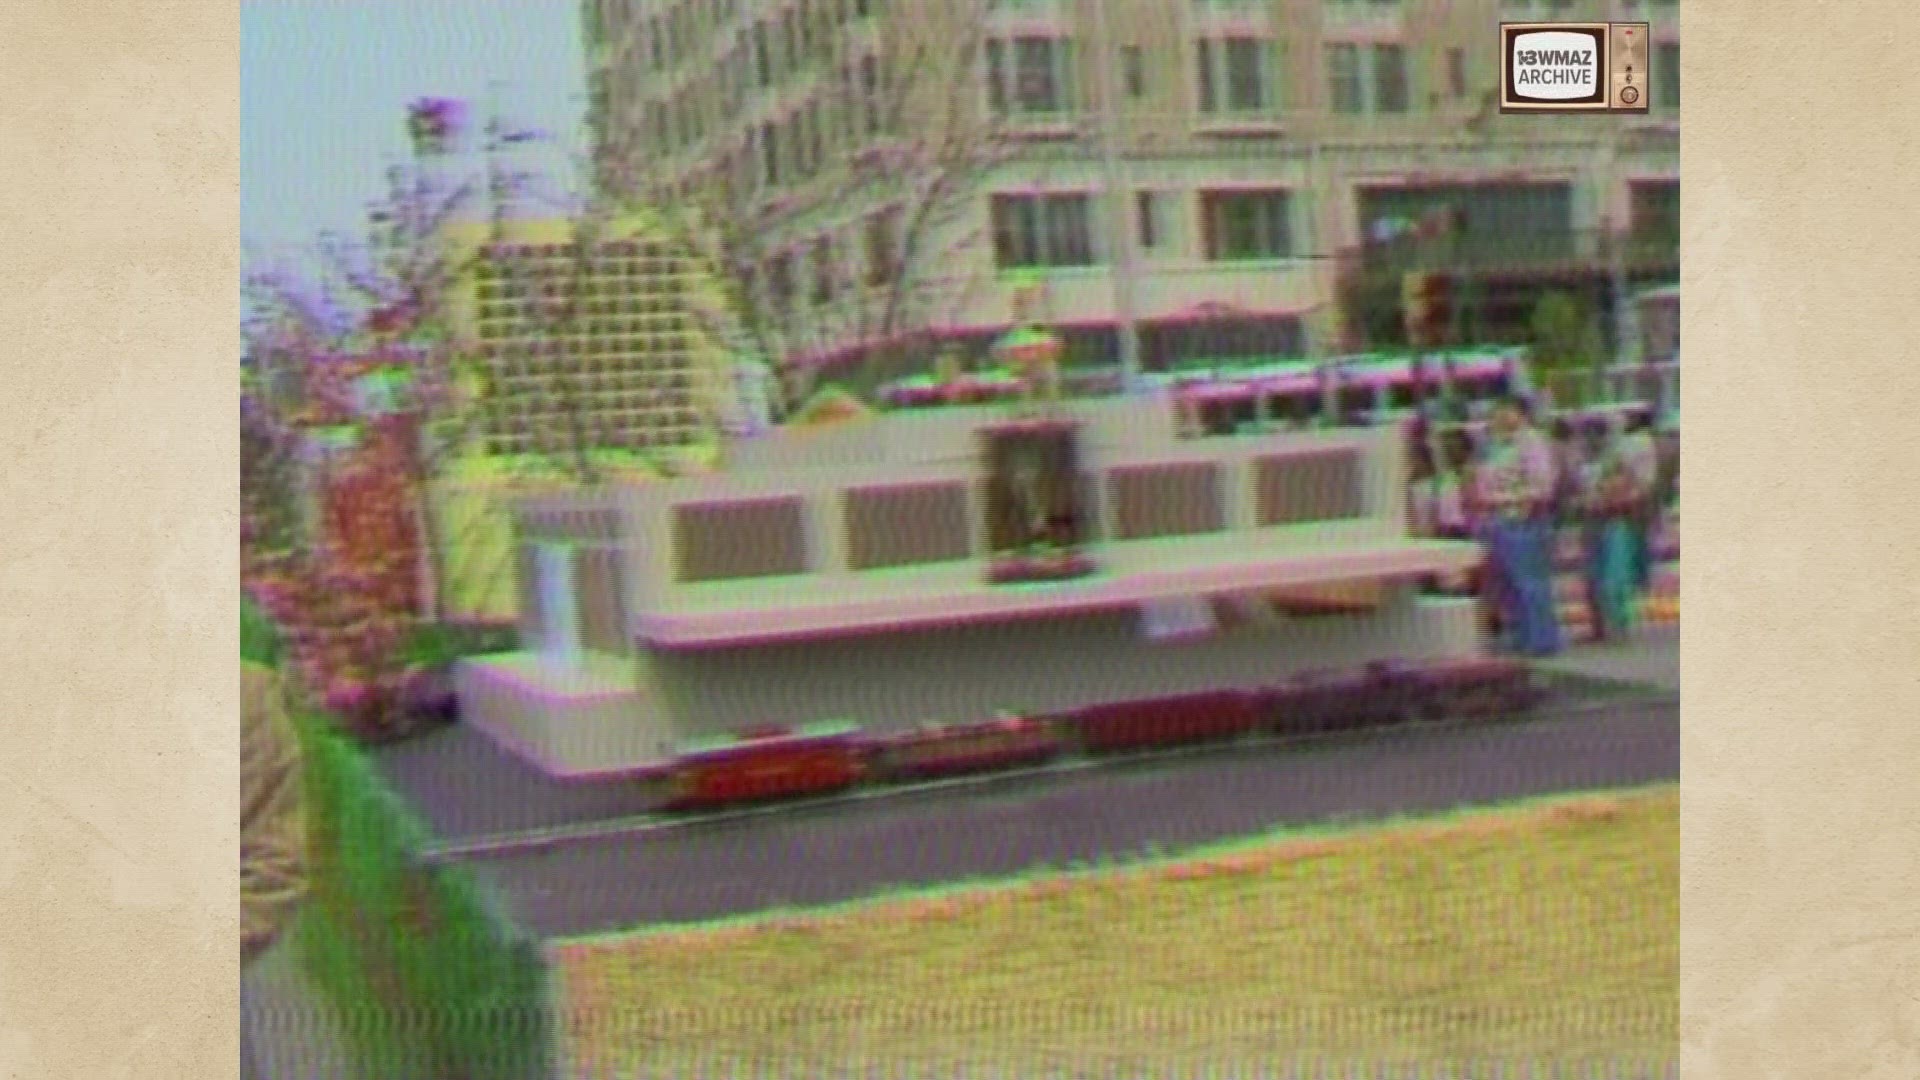 Back in 1983, the Cherry Blossom parade featured several floats and organizations, like the Northeast Raider Marching Band, Fire Department, and Shriners.